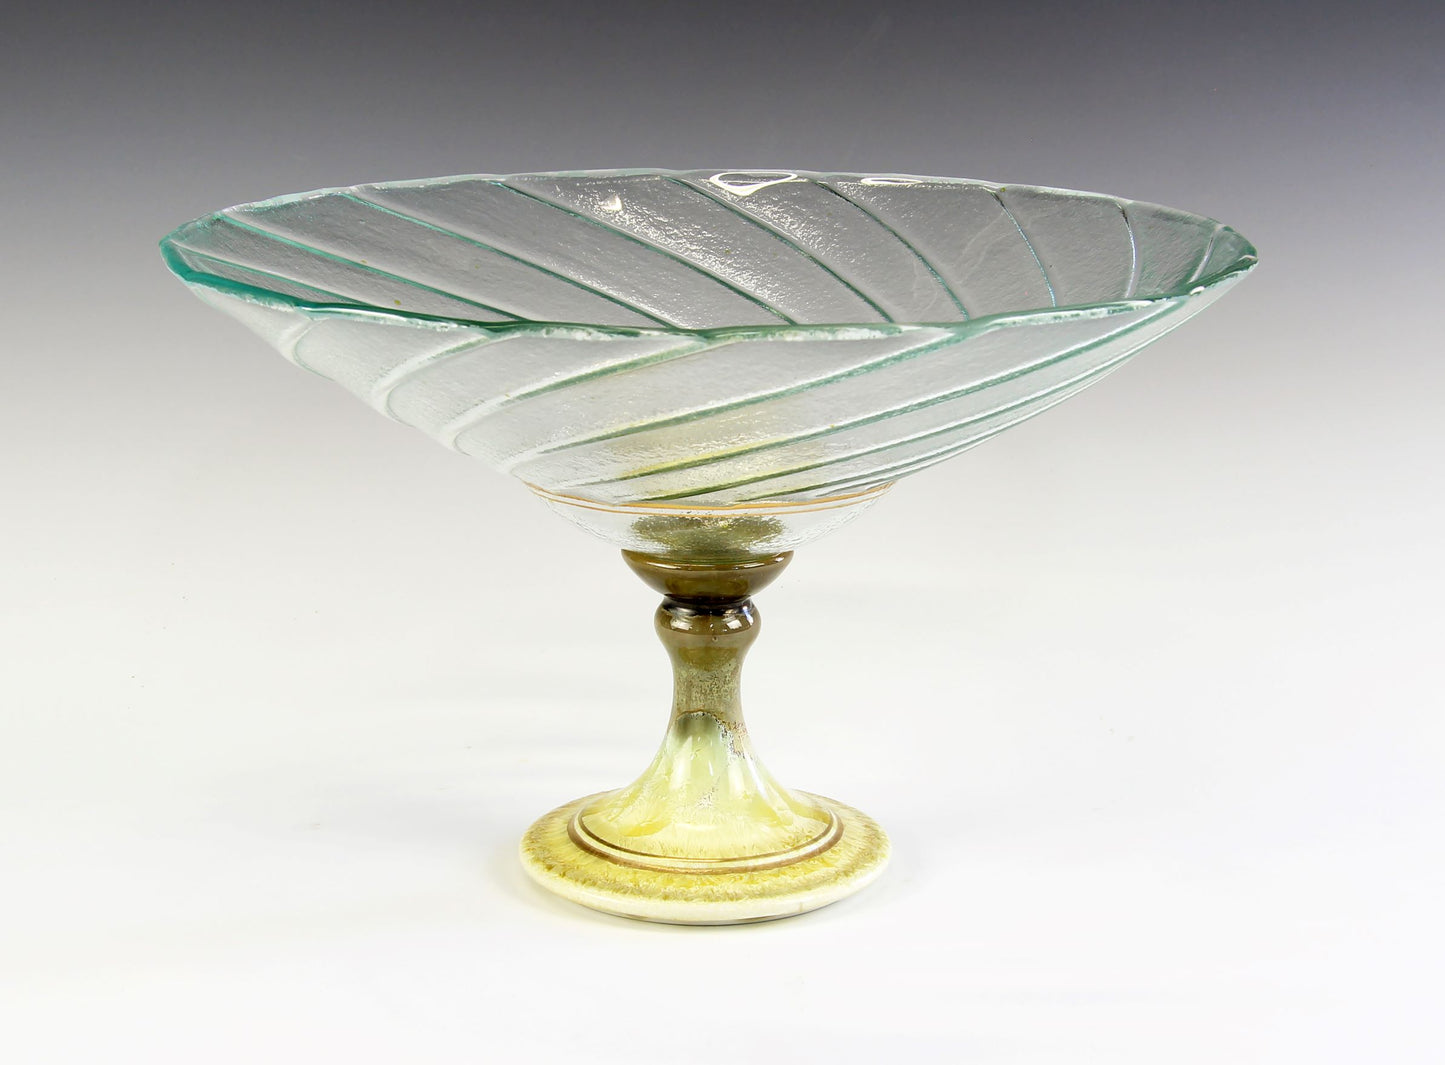 Bill Powell - Transition Crystal Compote